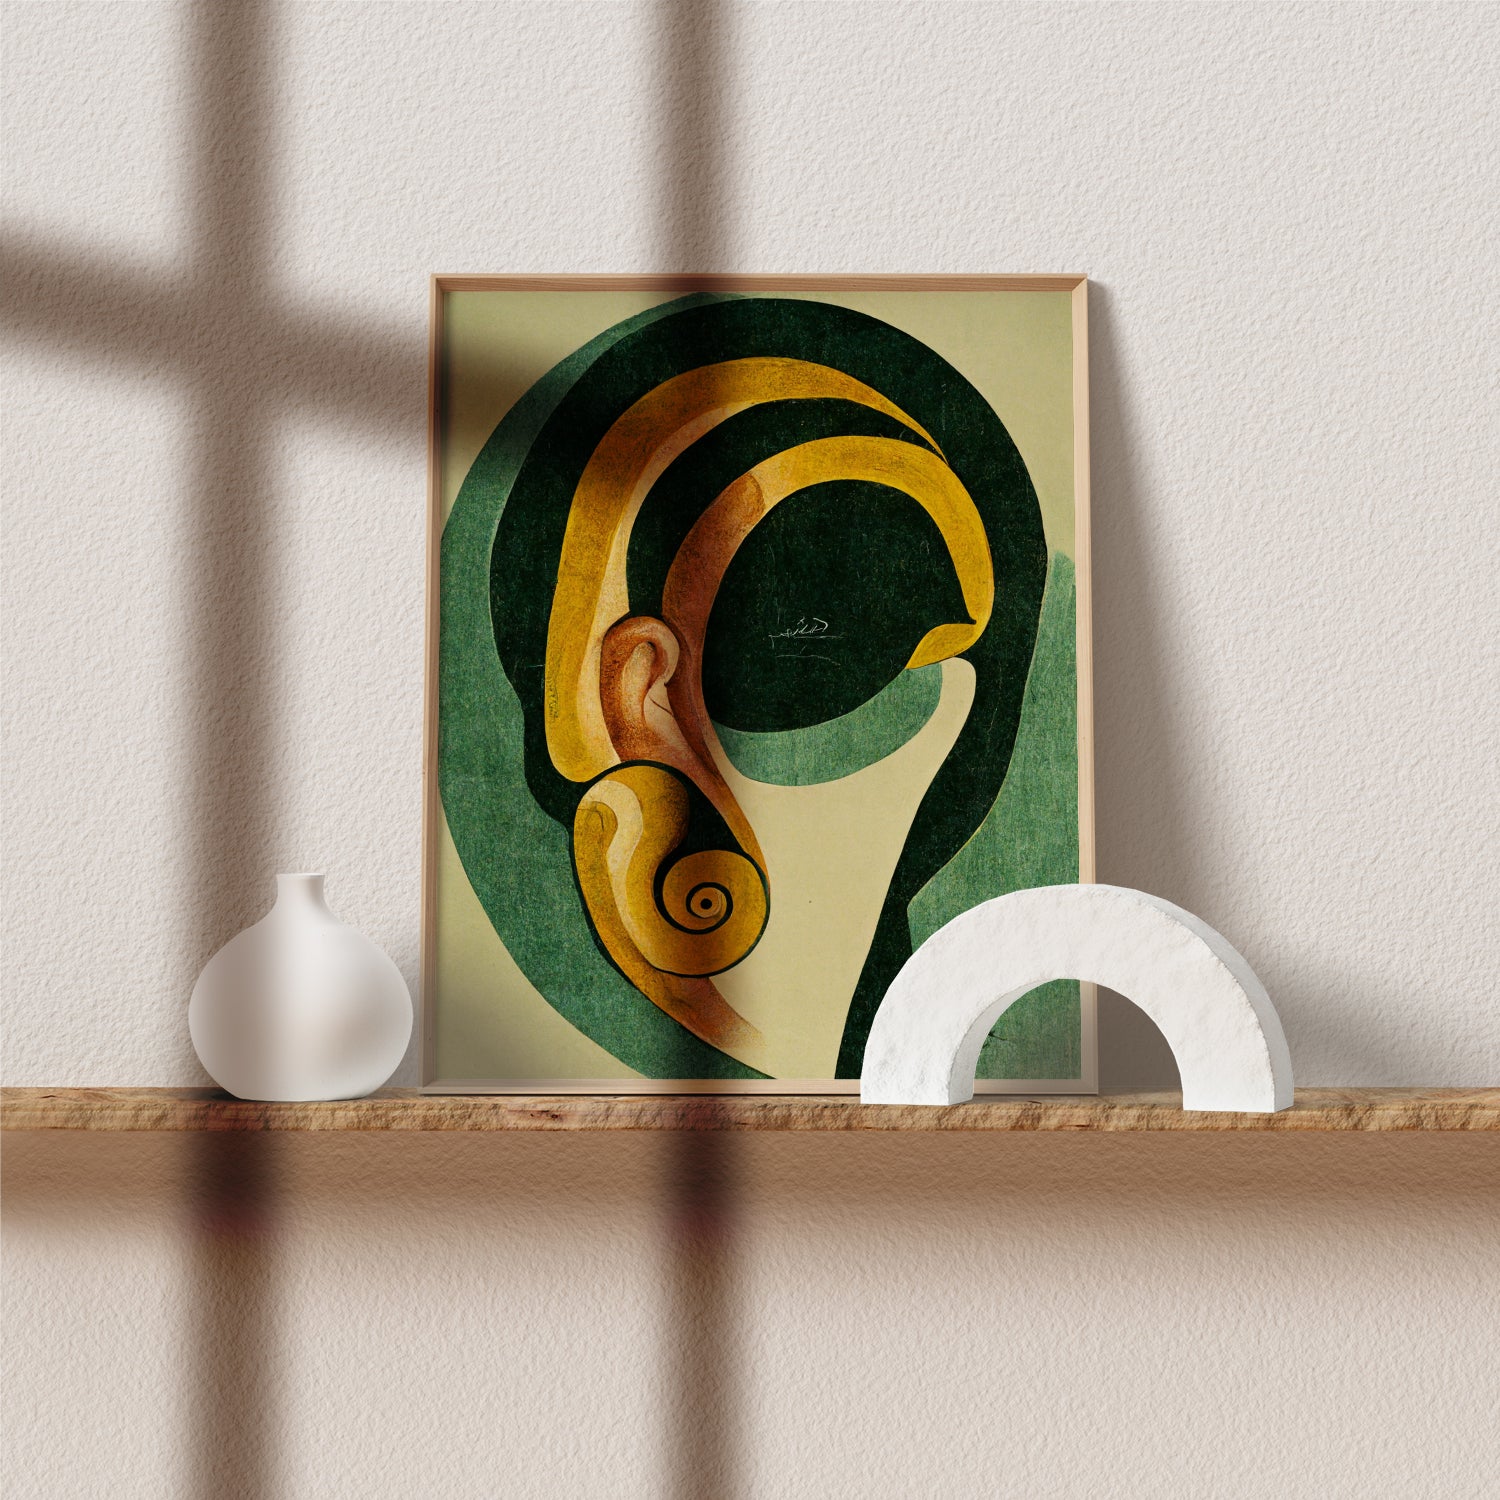 Ear Anatomy Art Poster - Enhancing ENT Clinic Ambiance